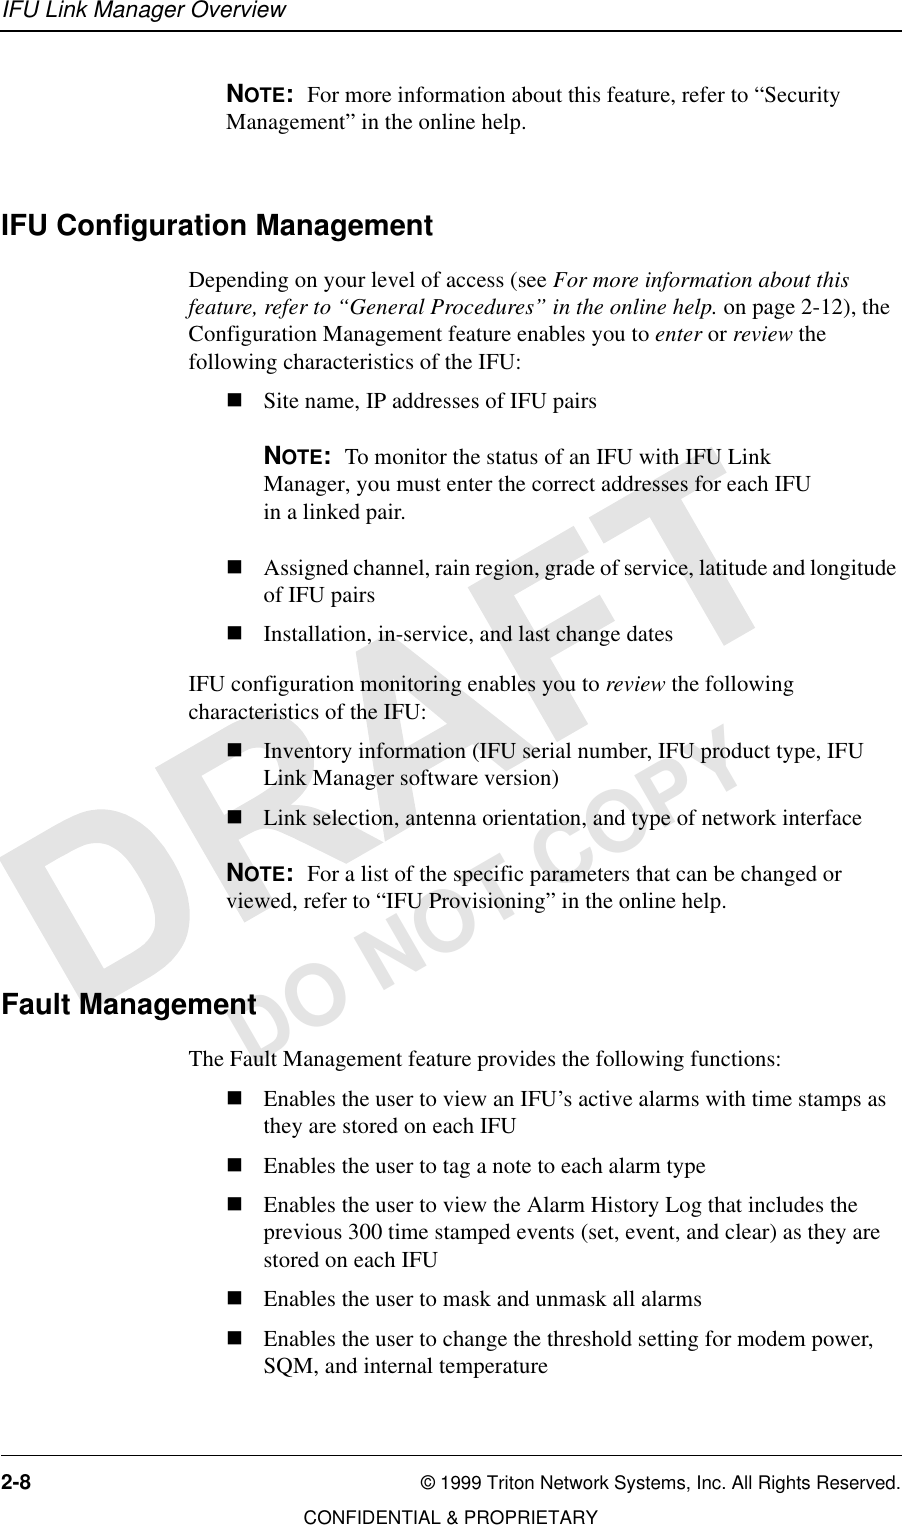 IFU Link Manager Overview2-8 © 1999 Triton Network Systems, Inc. All Rights Reserved.CONFIDENTIAL &amp; PROPRIETARYDO NOT COPYNOTE:  For more information about this feature, refer to “Security Management” in the online help.IFU Configuration ManagementDepending on your level of access (see For more information about this feature, refer to “General Procedures” in the online help. on page 2-12), the Configuration Management feature enables you to enter or review the following characteristics of the IFU:nSite name, IP addresses of IFU pairsNOTE:  To monitor the status of an IFU with IFU Link Manager, you must enter the correct addresses for each IFU in a linked pair.nAssigned channel, rain region, grade of service, latitude and longitude of IFU pairsnInstallation, in-service, and last change datesIFU configuration monitoring enables you to review the following characteristics of the IFU:nInventory information (IFU serial number, IFU product type, IFU Link Manager software version)nLink selection, antenna orientation, and type of network interfaceNOTE:  For a list of the specific parameters that can be changed or viewed, refer to “IFU Provisioning” in the online help.Fault ManagementThe Fault Management feature provides the following functions:nEnables the user to view an IFU’s active alarms with time stamps as they are stored on each IFUnEnables the user to tag a note to each alarm typenEnables the user to view the Alarm History Log that includes the previous 300 time stamped events (set, event, and clear) as they are stored on each IFUnEnables the user to mask and unmask all alarmsnEnables the user to change the threshold setting for modem power, SQM, and internal temperature